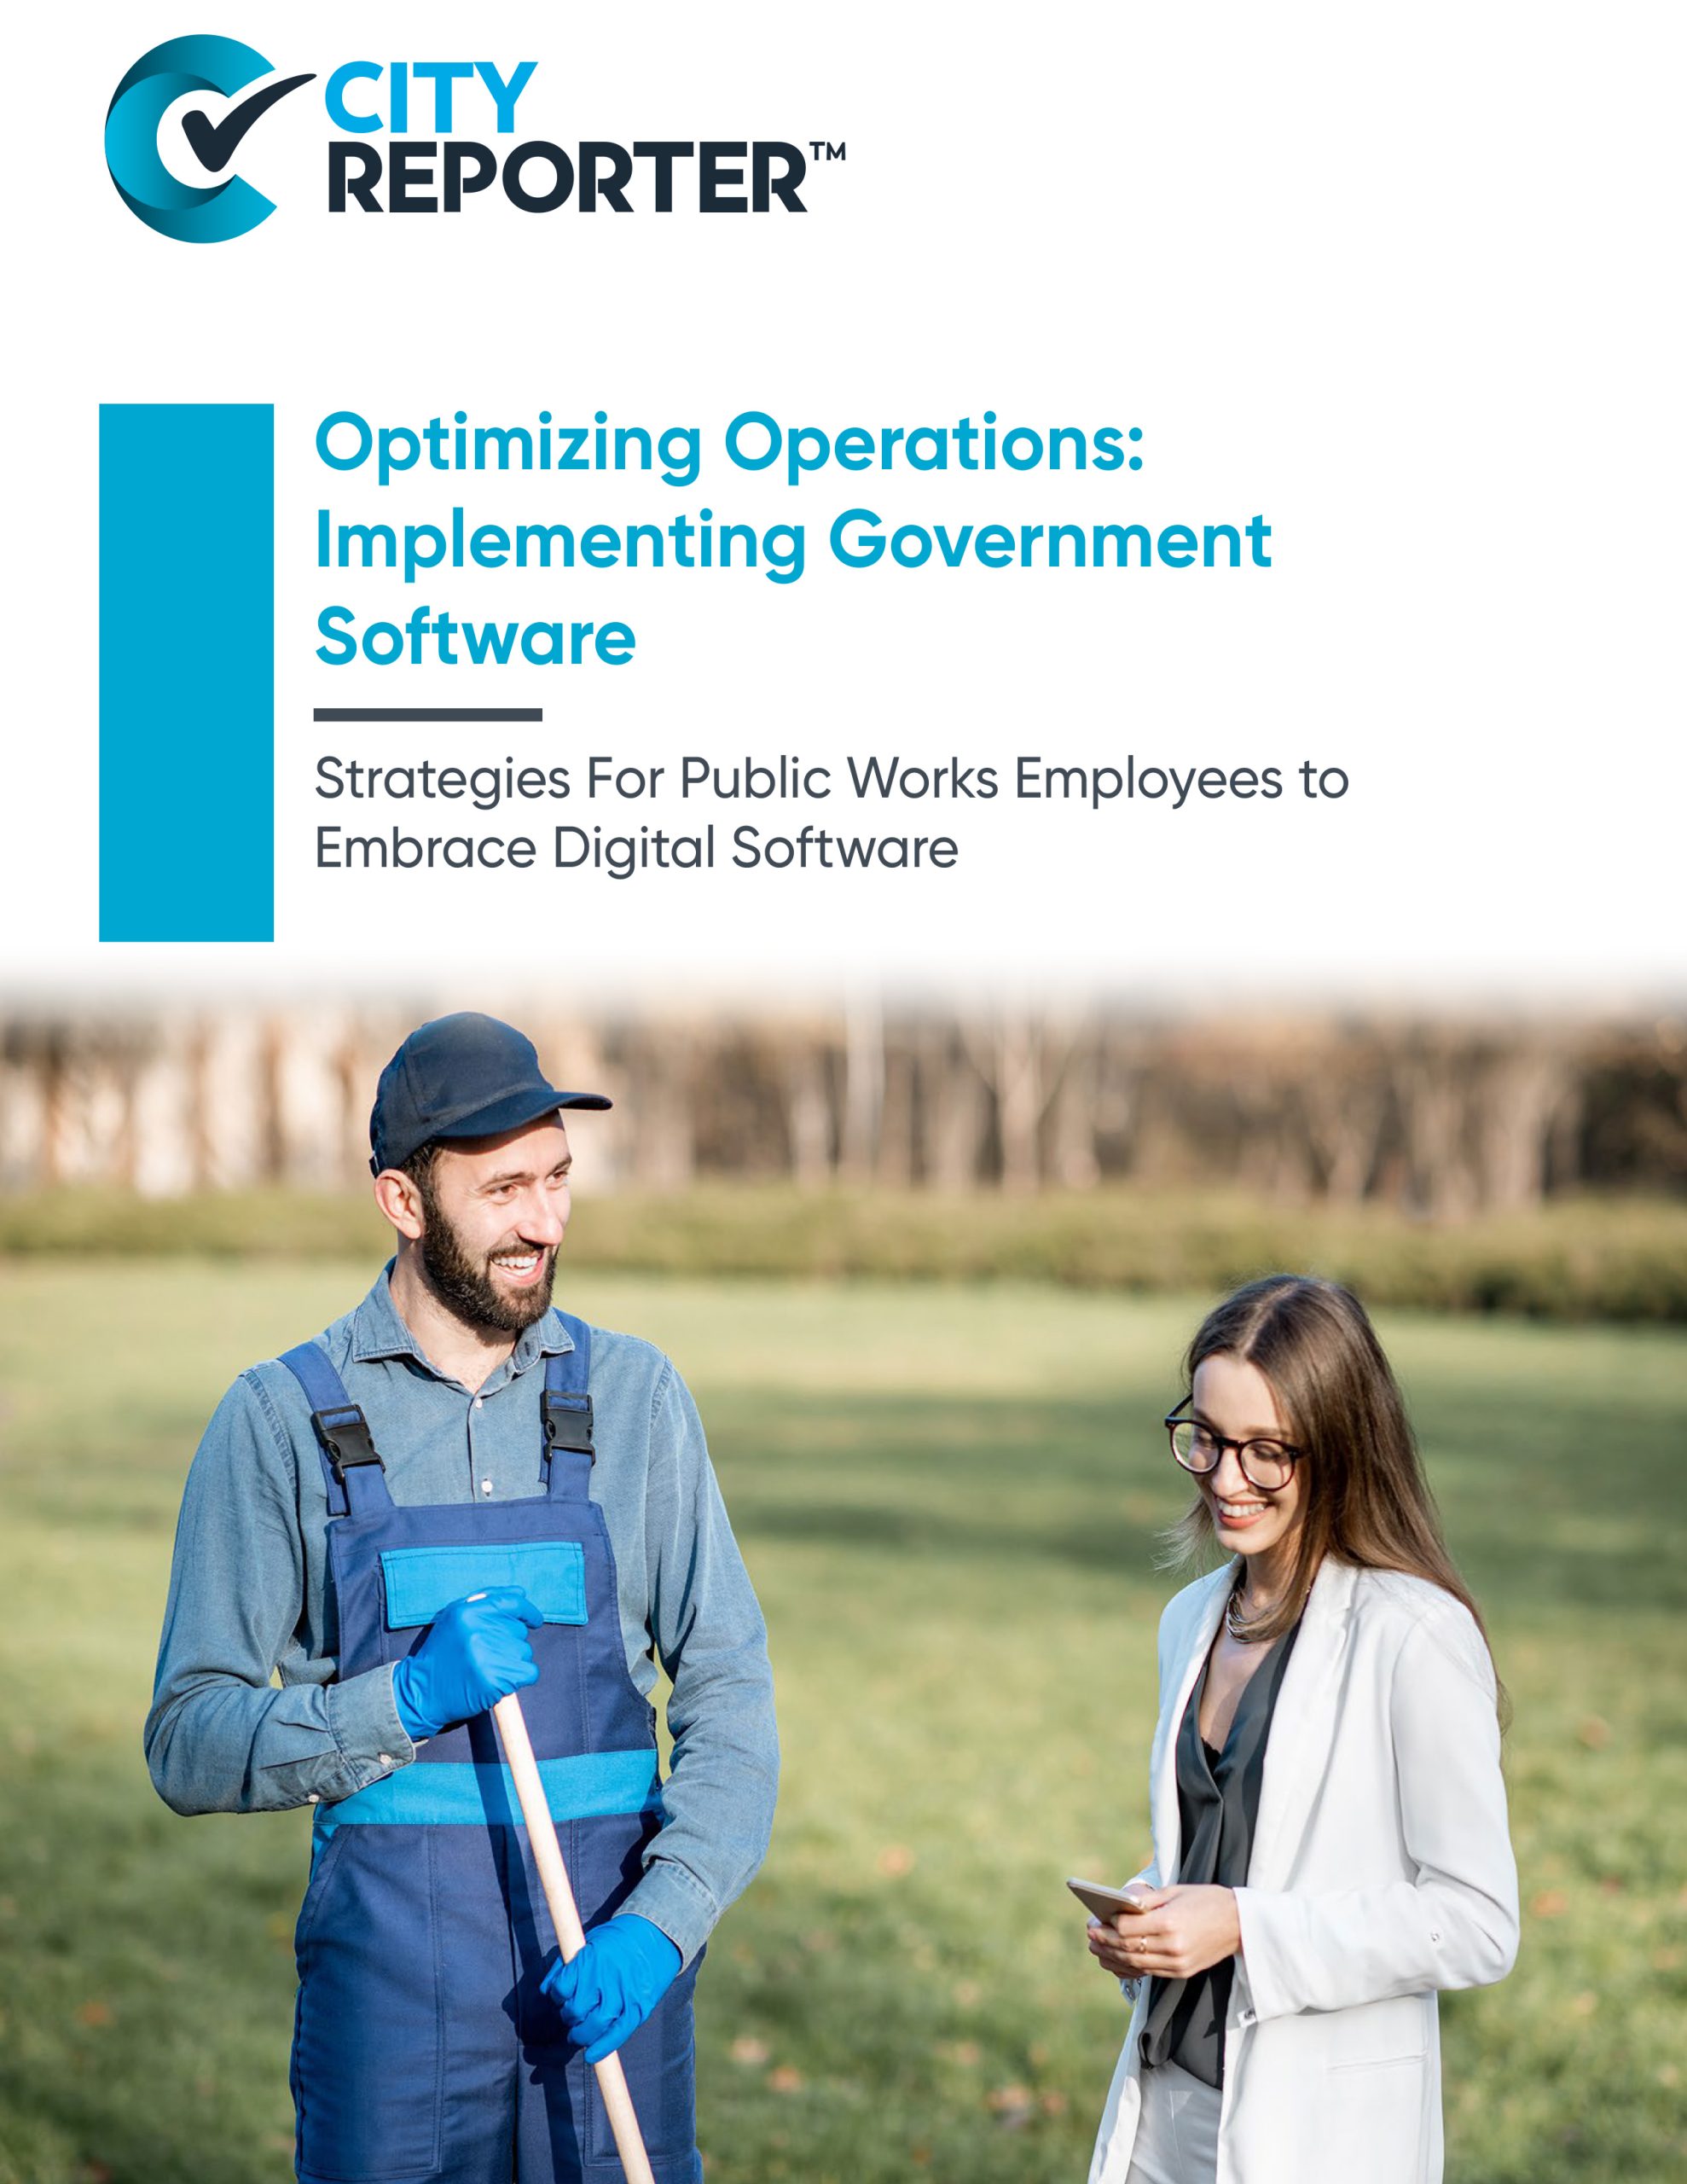 The first page of CityReporter's document - Strategies for Public Works Employees to Embrace Digital Software